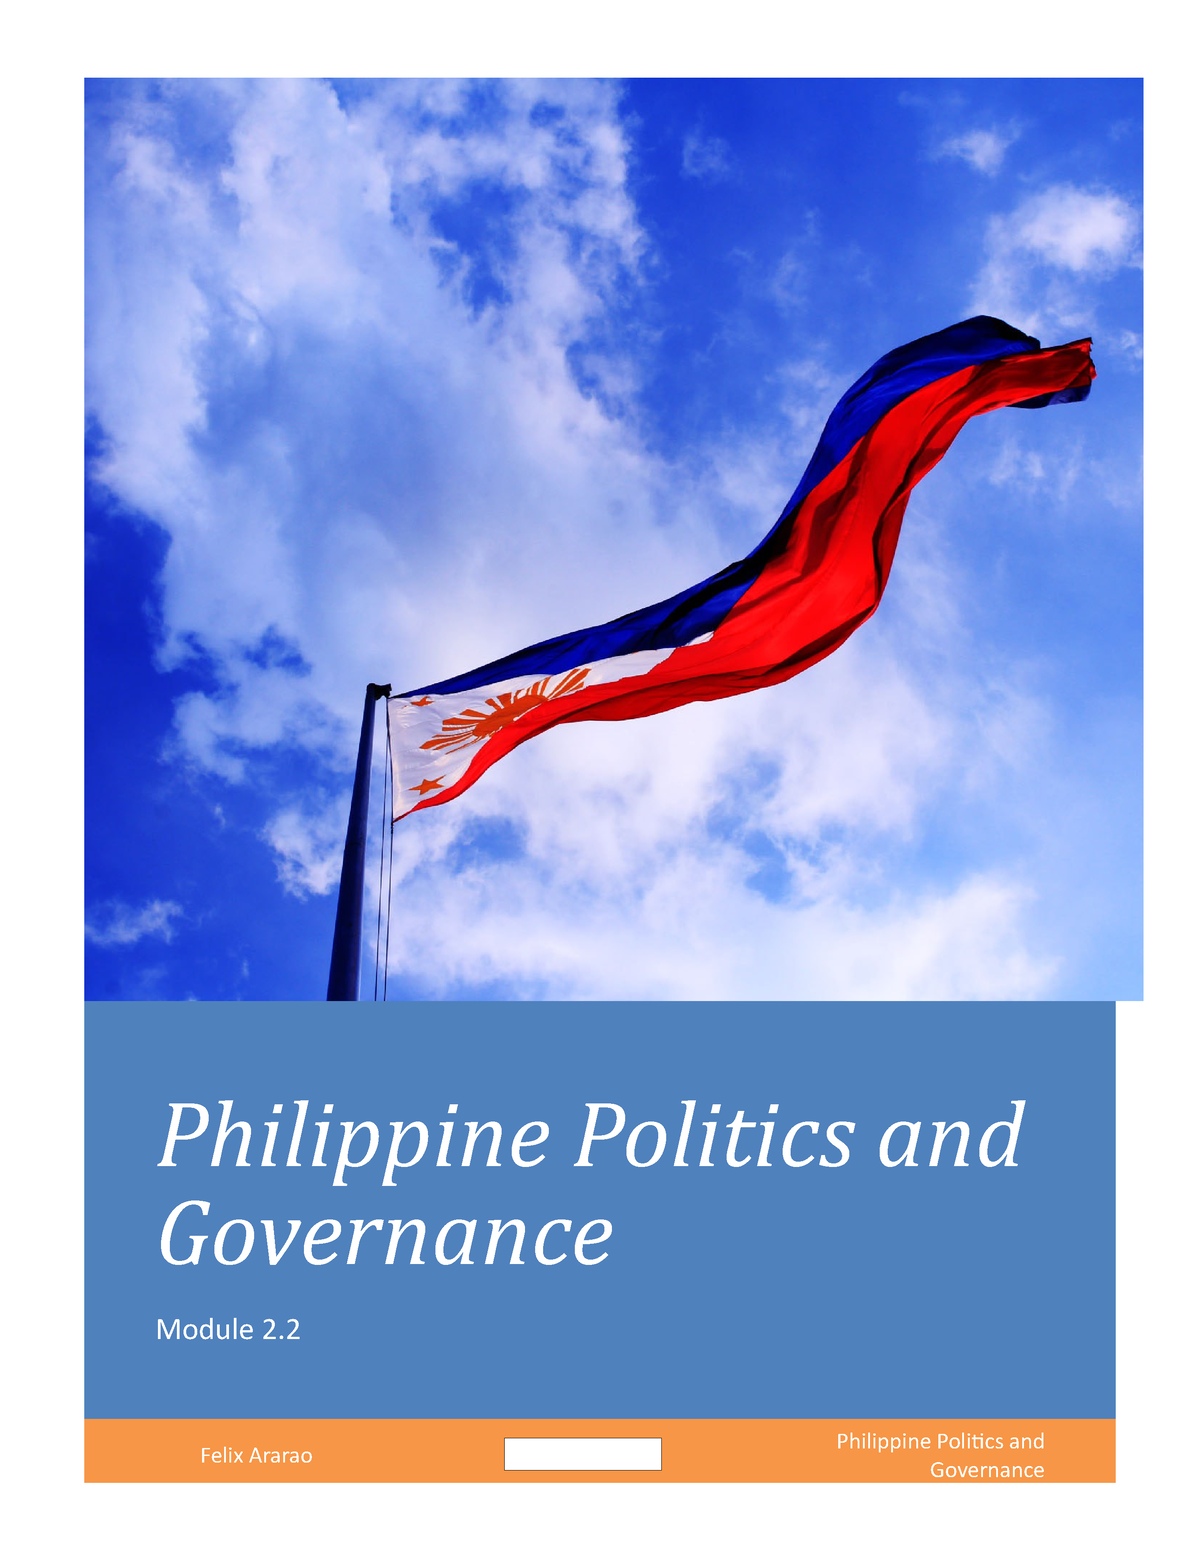 essay on the evolution of the philippine politics and governance